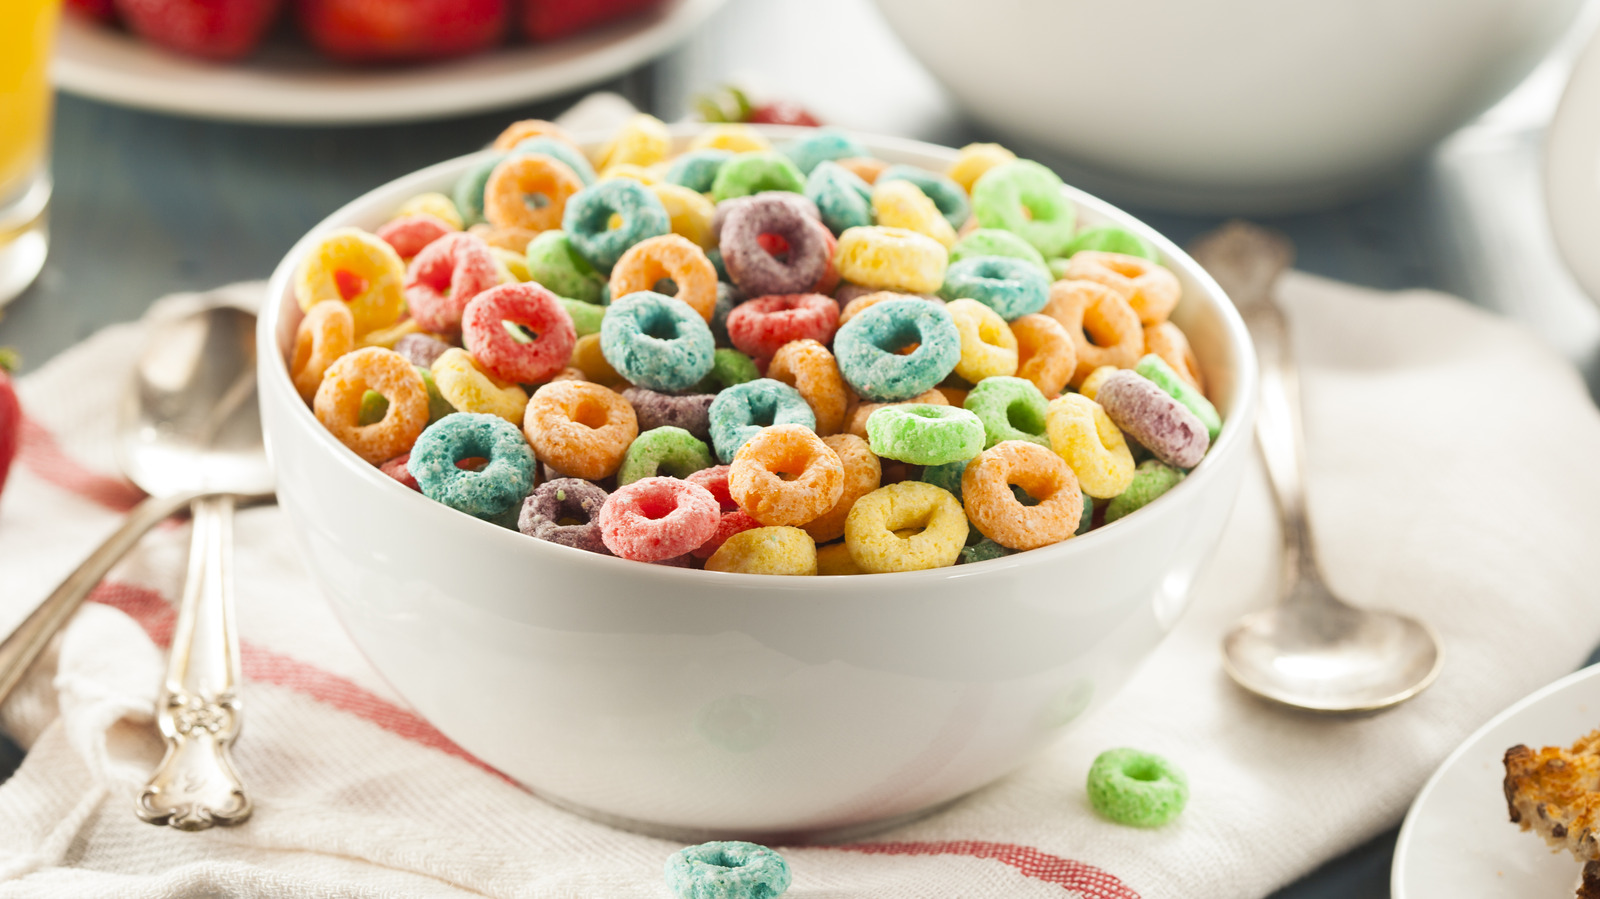 https://www.thelist.com/img/gallery/this-is-what-happens-to-your-body-if-you-eat-cereal-every-day/l-intro-1630700642.jpg